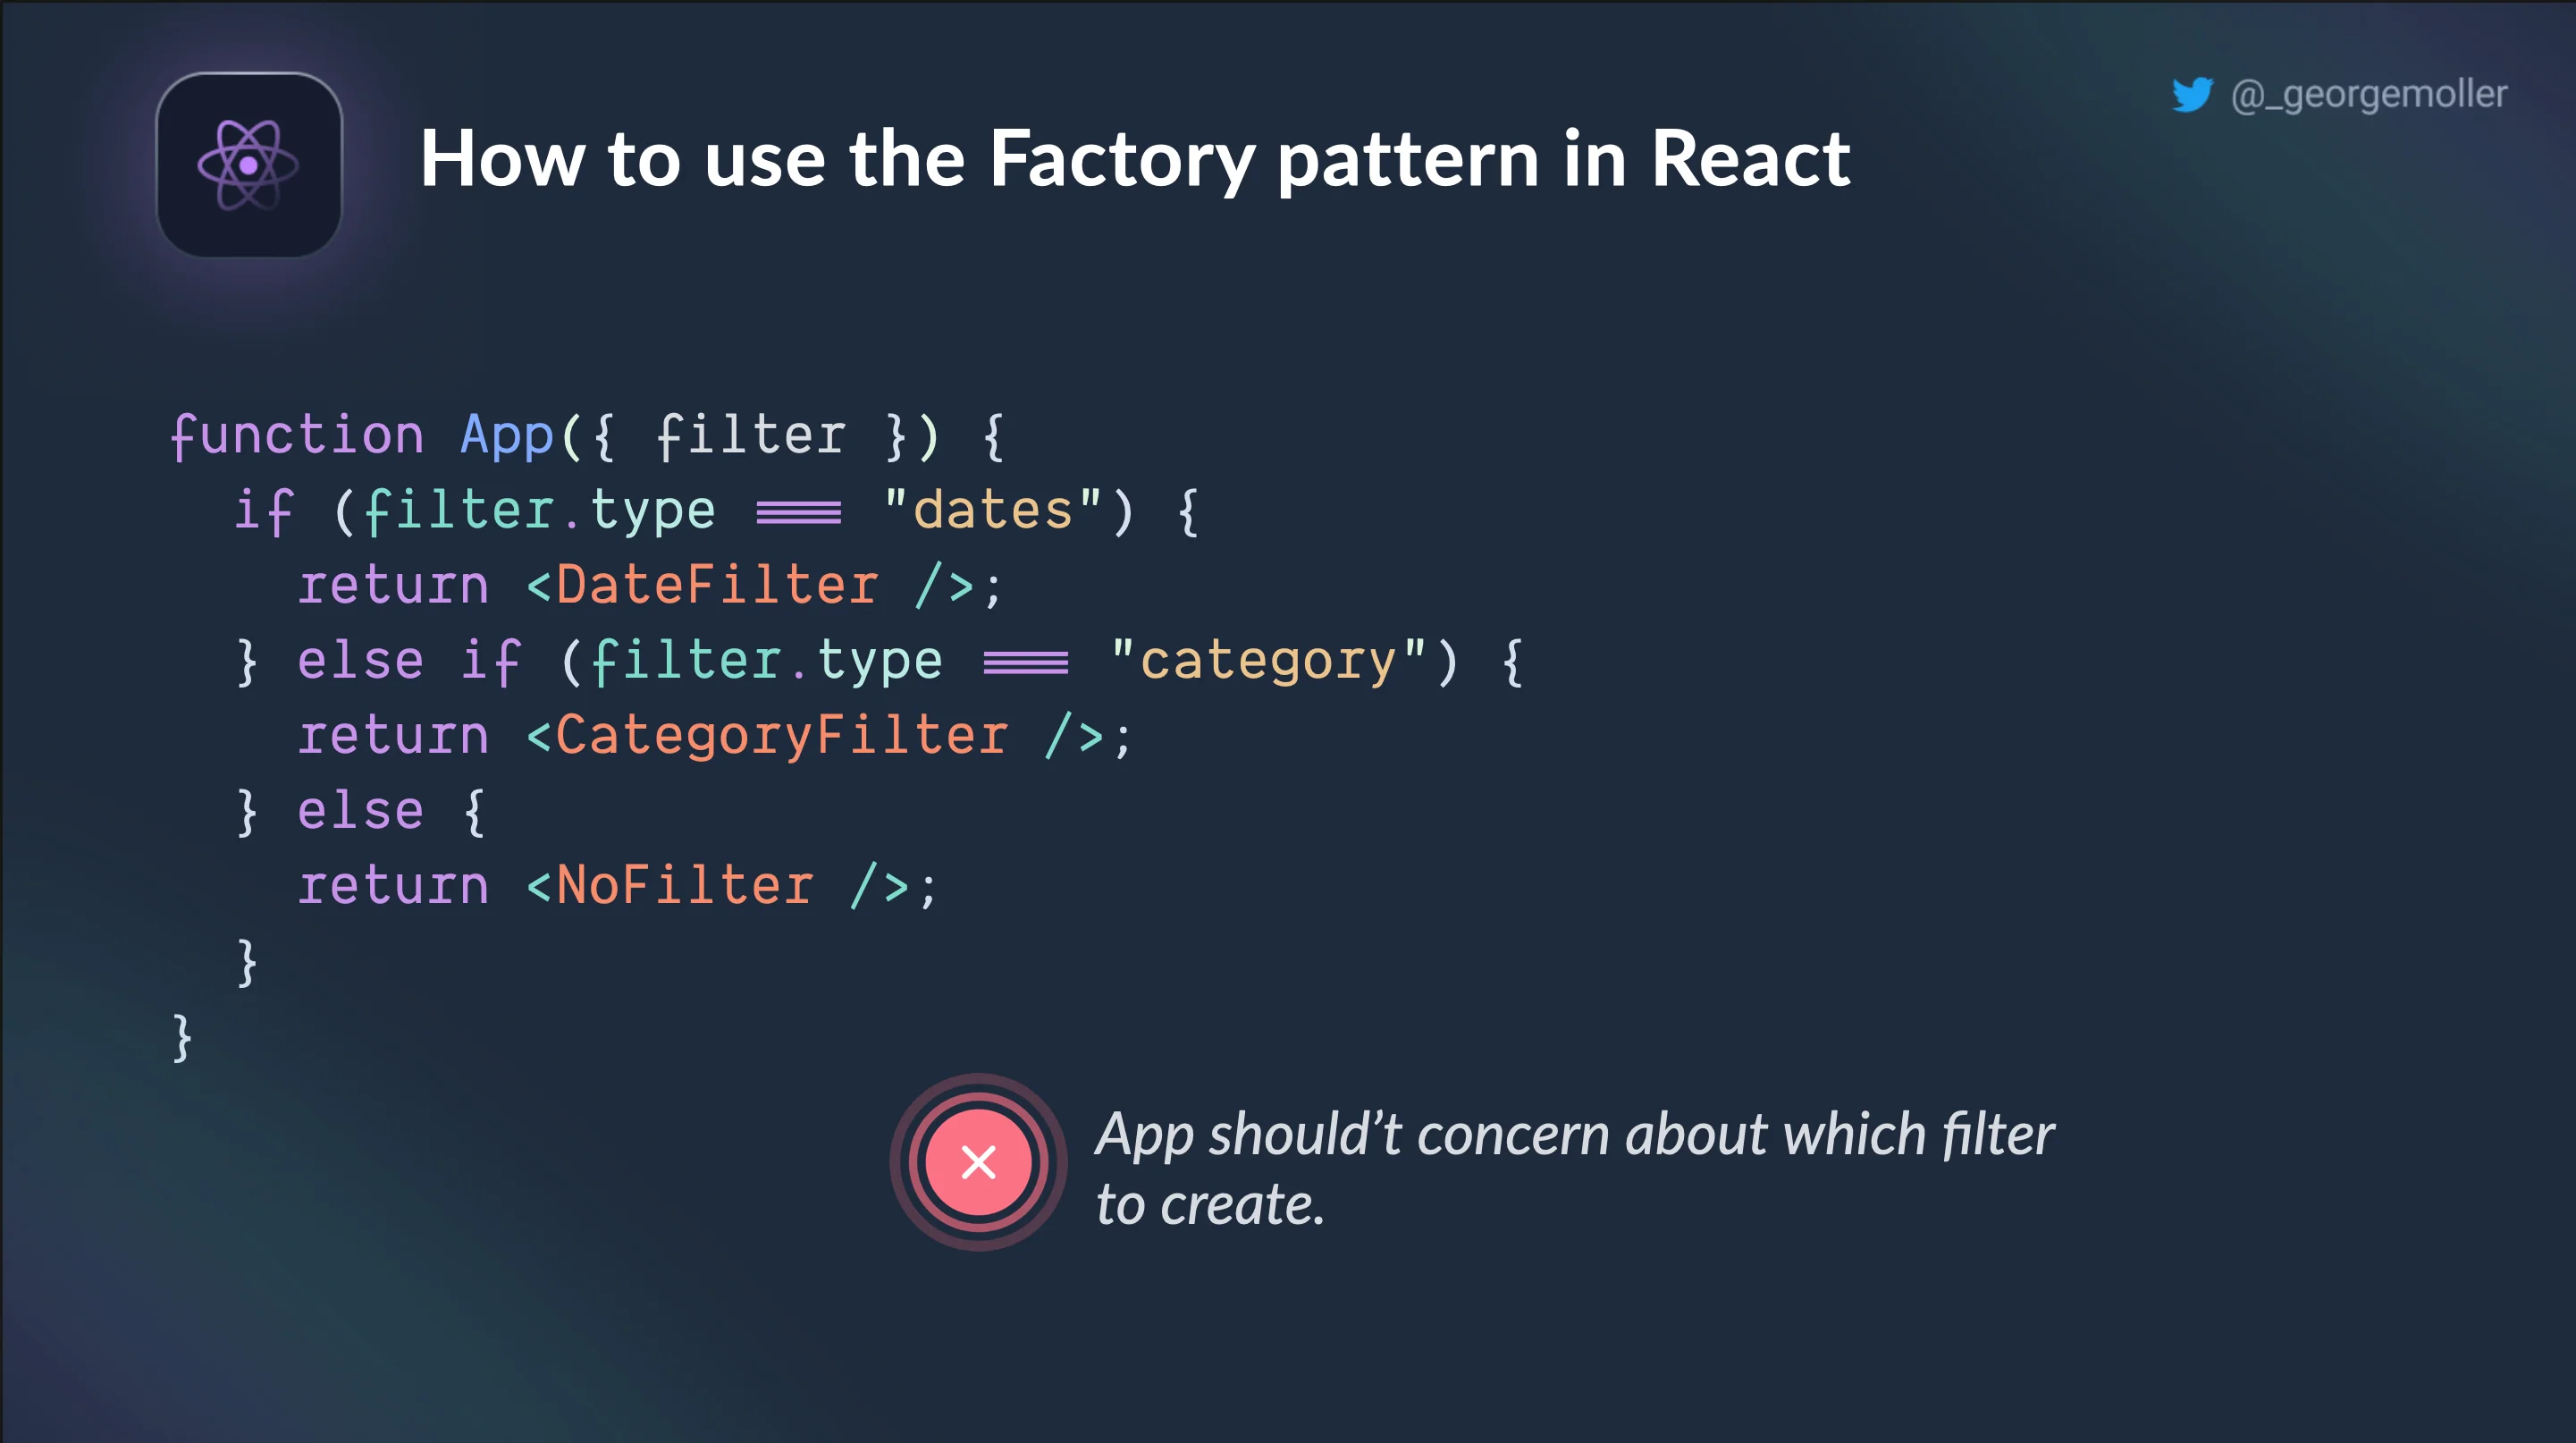 How to use the factory pattern in React?